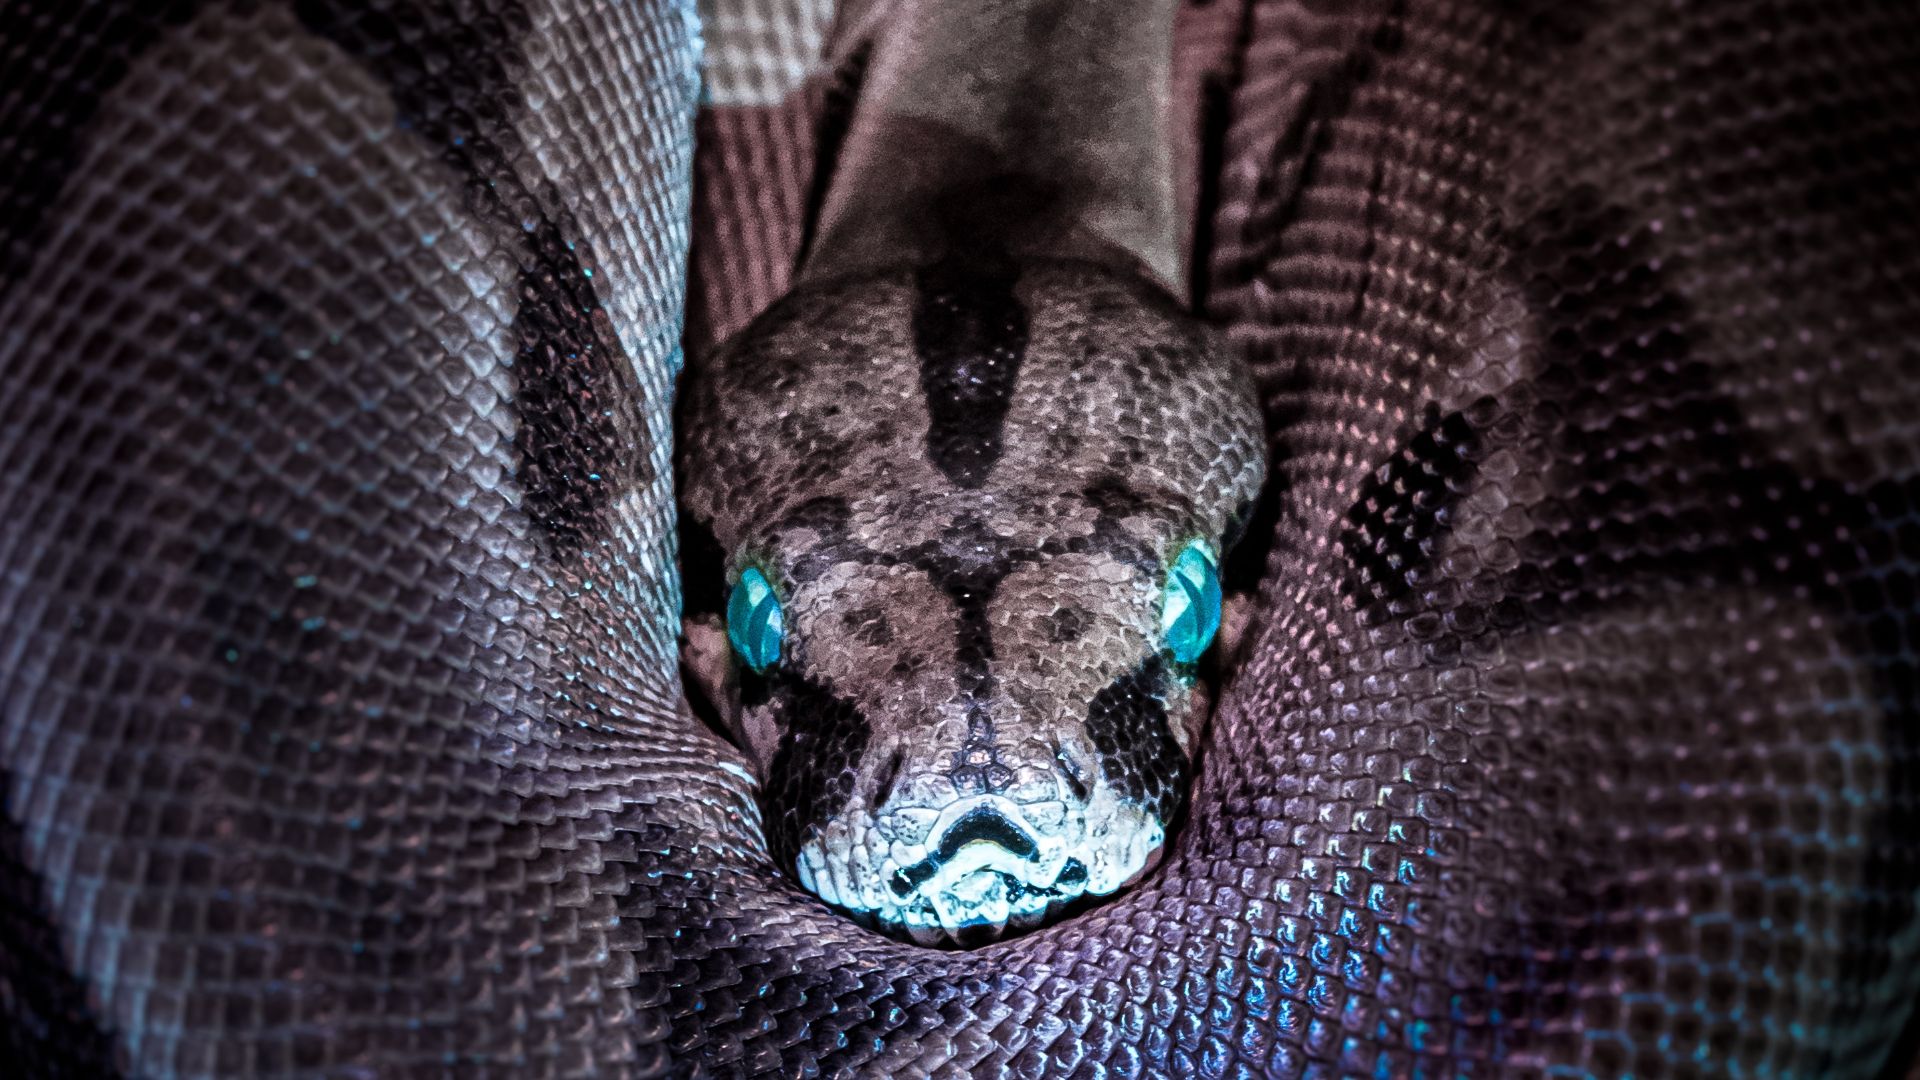 Snake head curled in its body